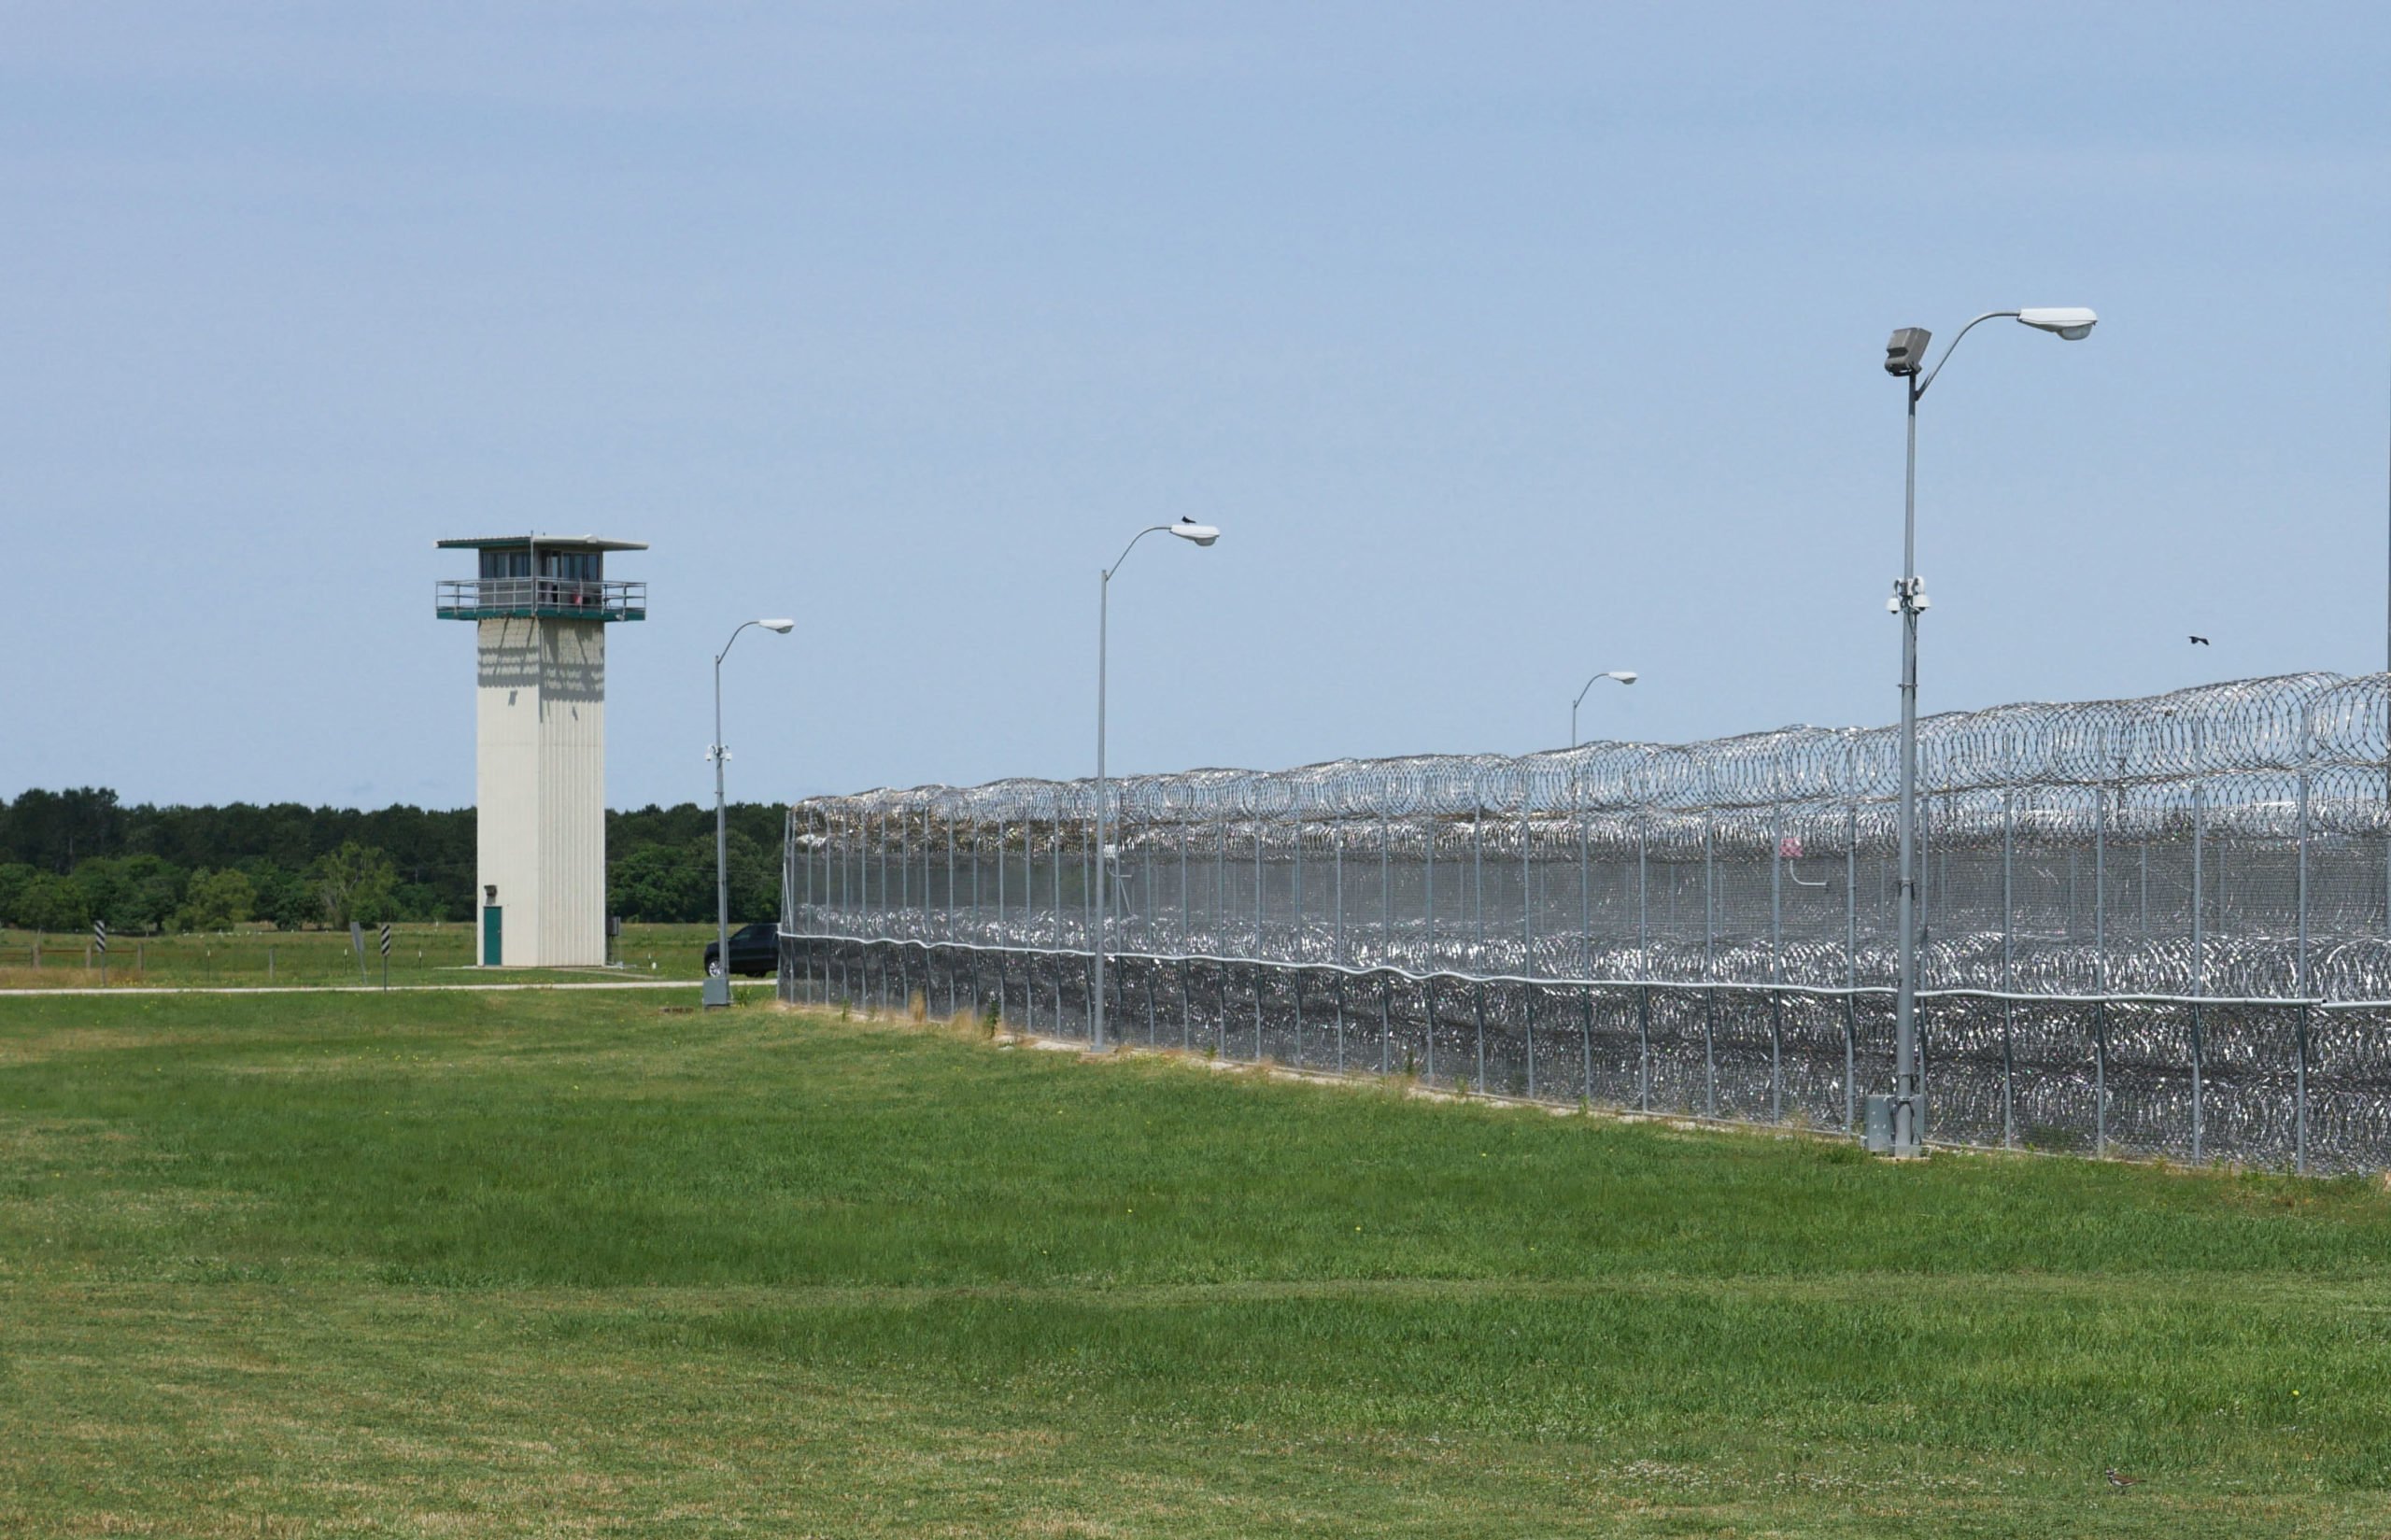 An exterior view shows Allan B. Polunsky prison and the wing of the building which houses Texas' death row for men in Livingston, Texas, on May 25, 2022. Hank Skinner, who has been on death row in Texas for nearly three decades, says he still remains hopeful. "I am optimistic I won't end up here. I should have never been here to start with. And it's been a long journey," he told AFP during an interview. (Photo by CECILE CLOCHERET/AFP via Getty Images)